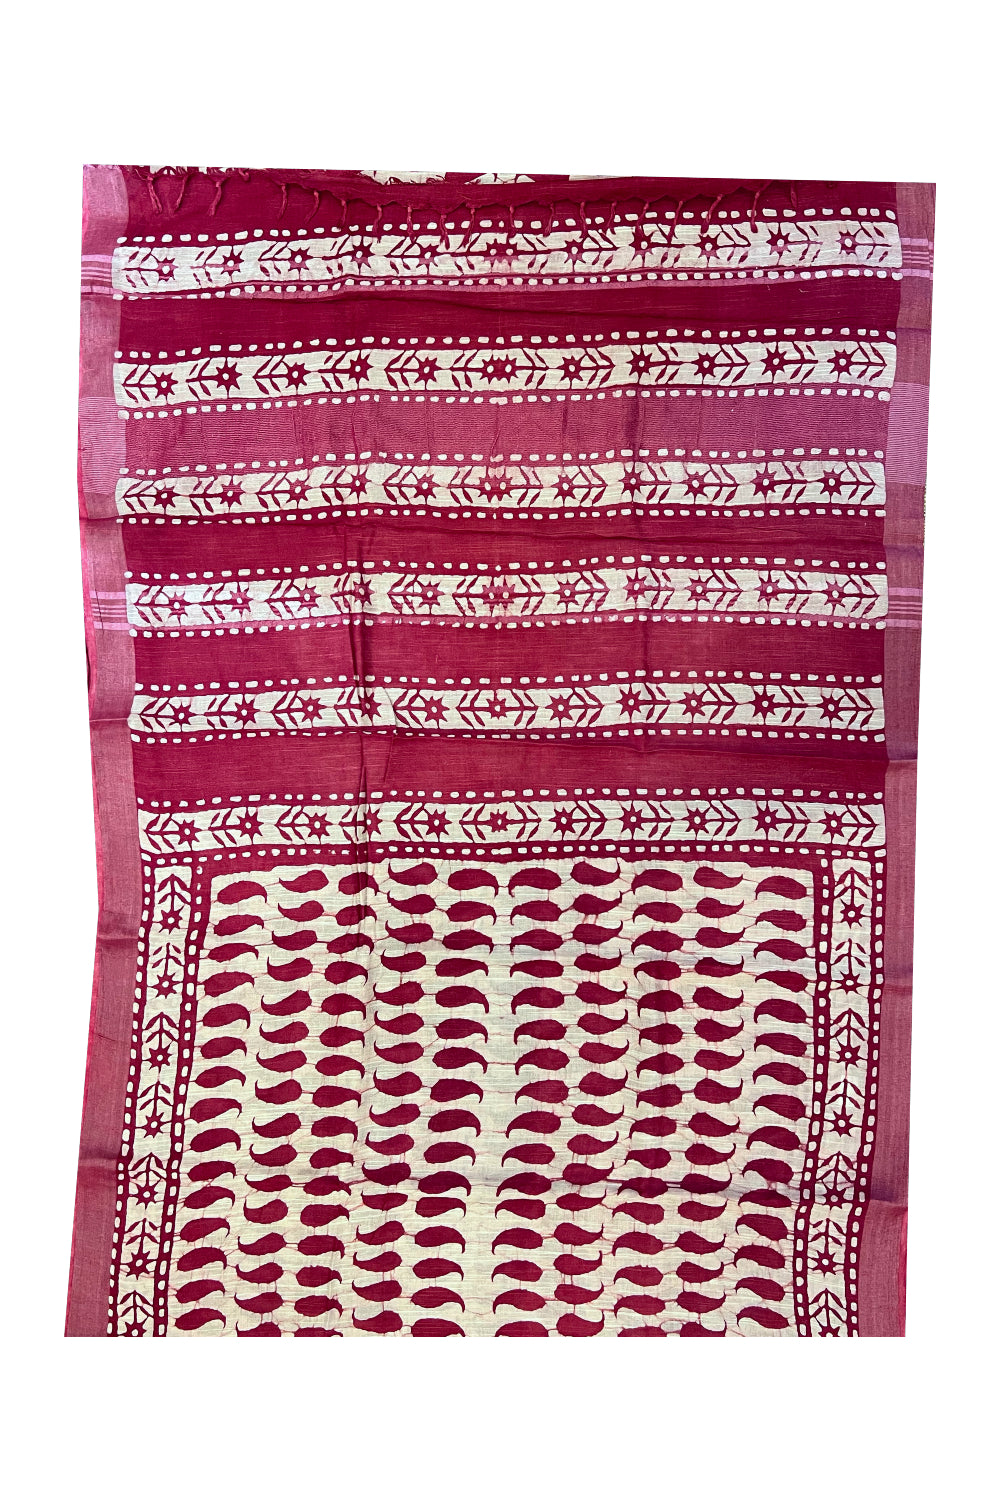 Southloom Linen Maroon and White Designer Saree